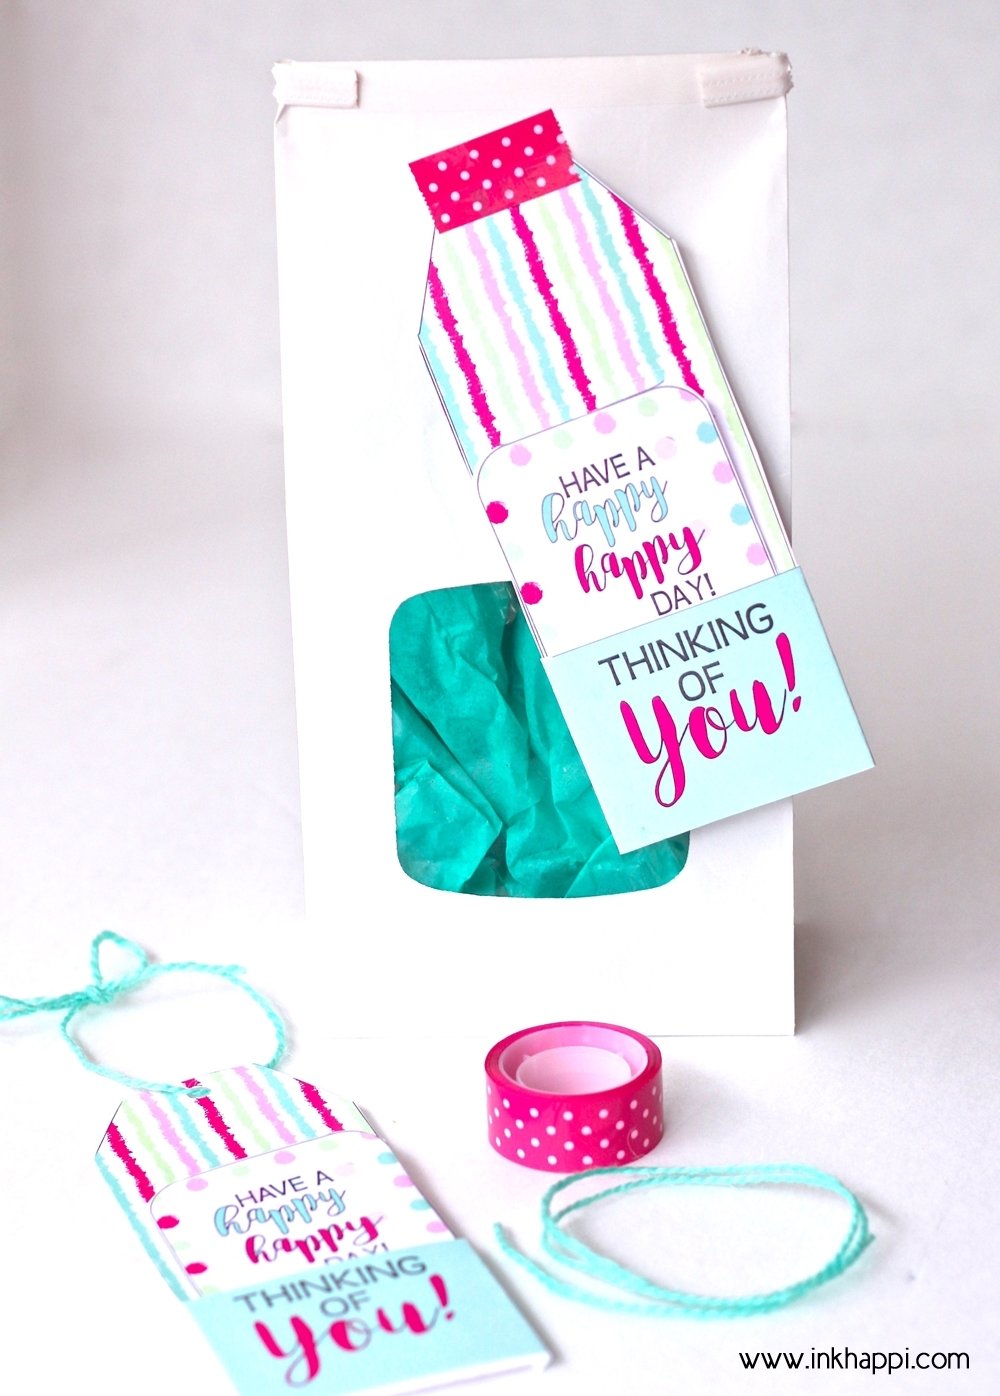 10 Most Recommended Thinking Of You Gift Ideas thinking of you gift tags and ideas to make someone happy inkhappi 2022